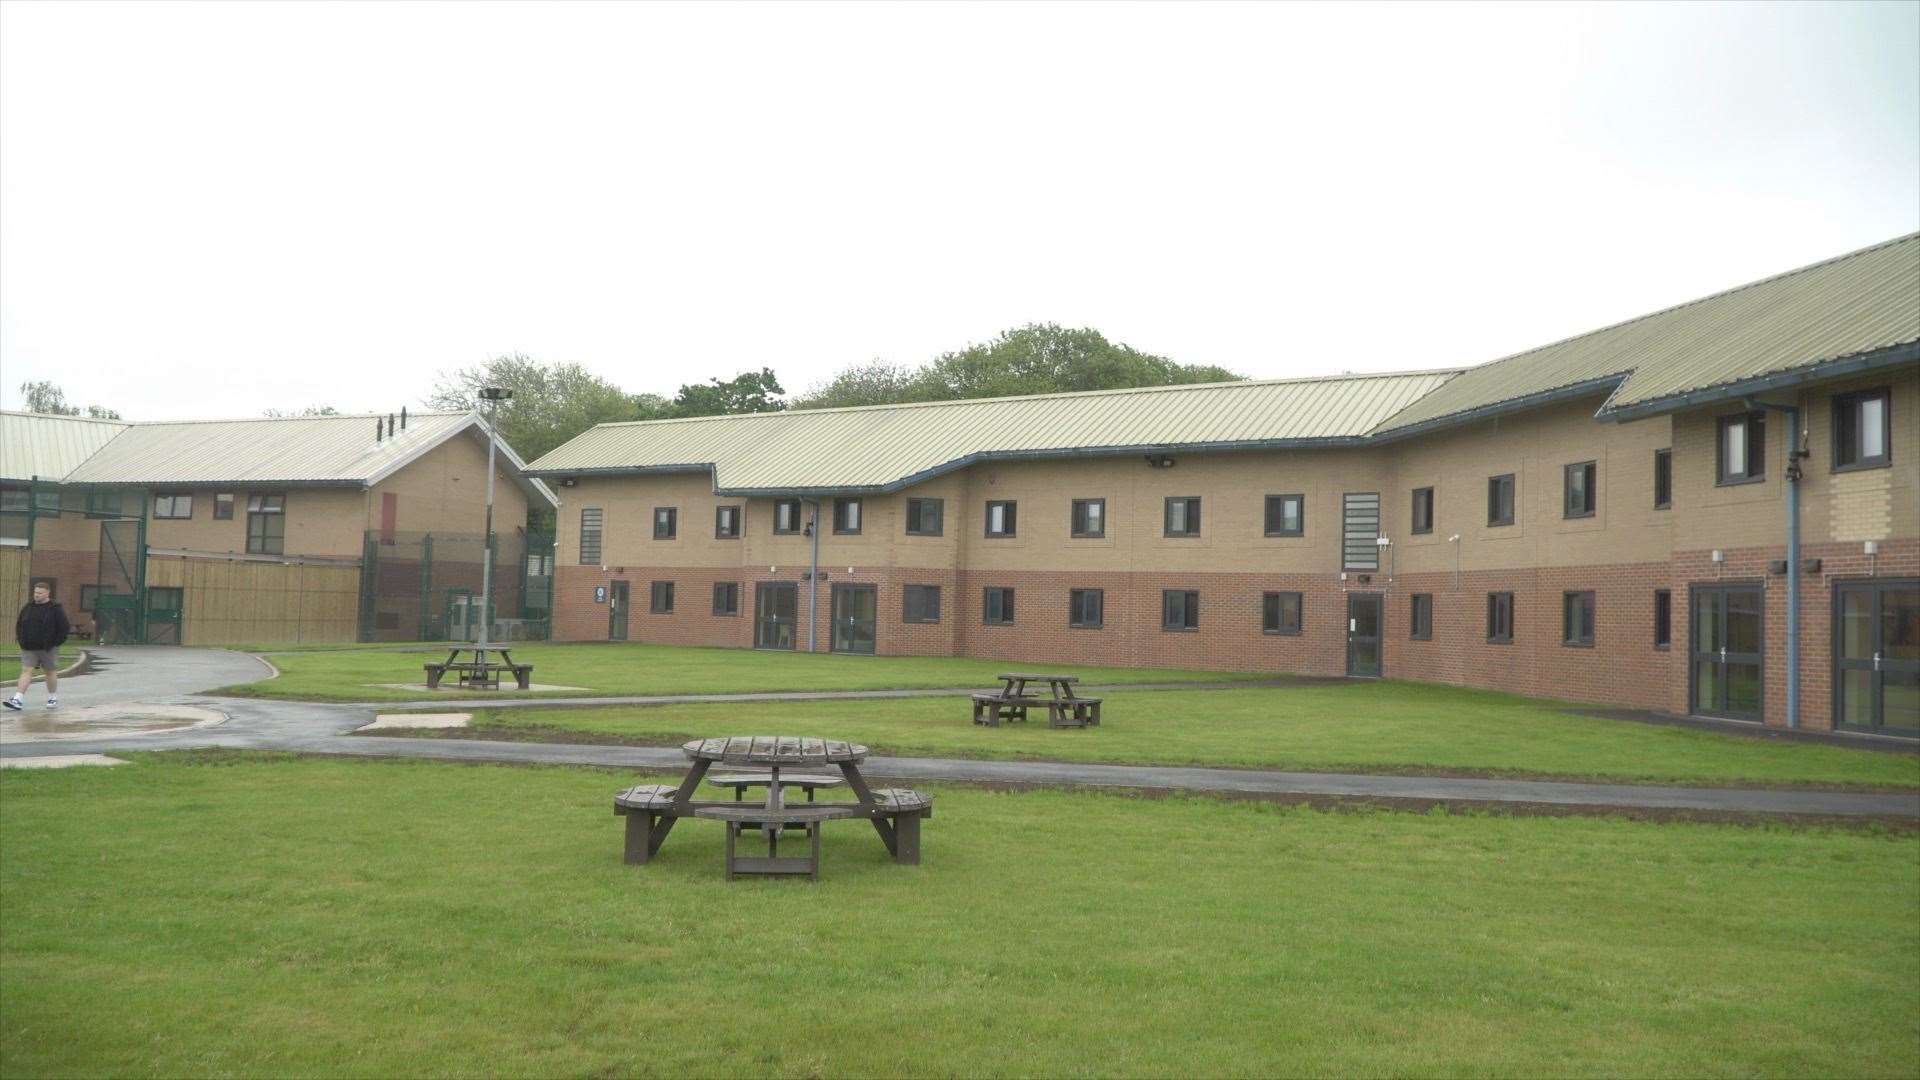 The prison courtyard at the Oasis Restore school in Rochester. Picture: KMTV